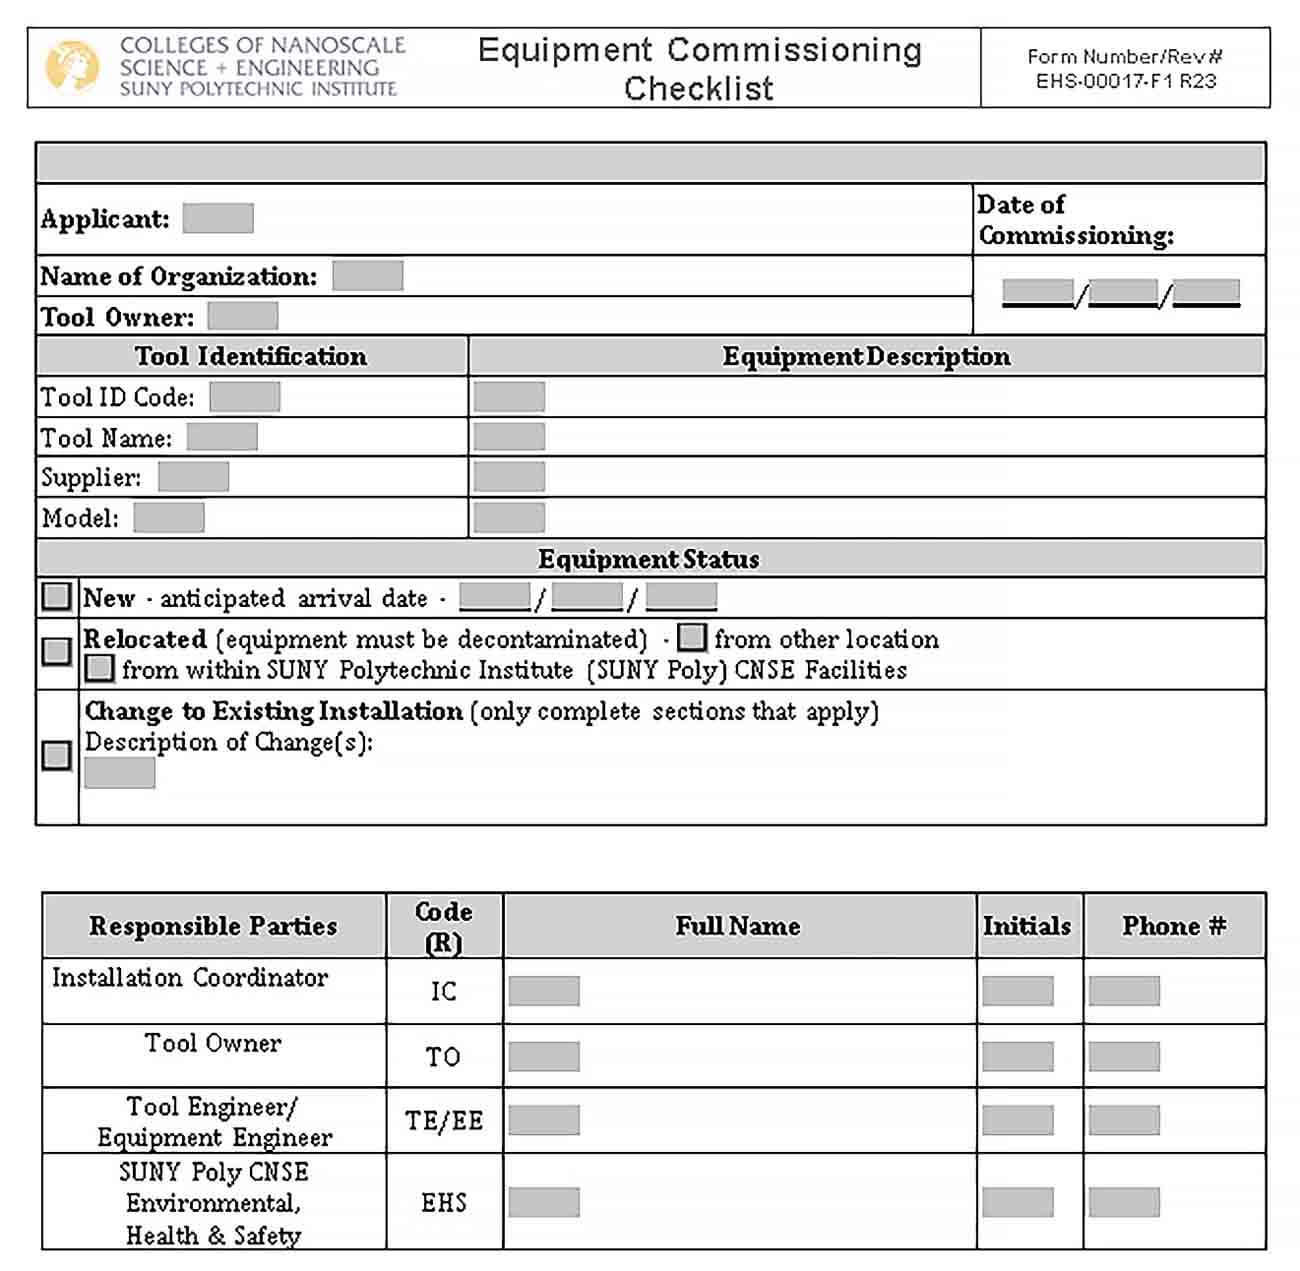 Sample Equipment Commissioning Checklist Template